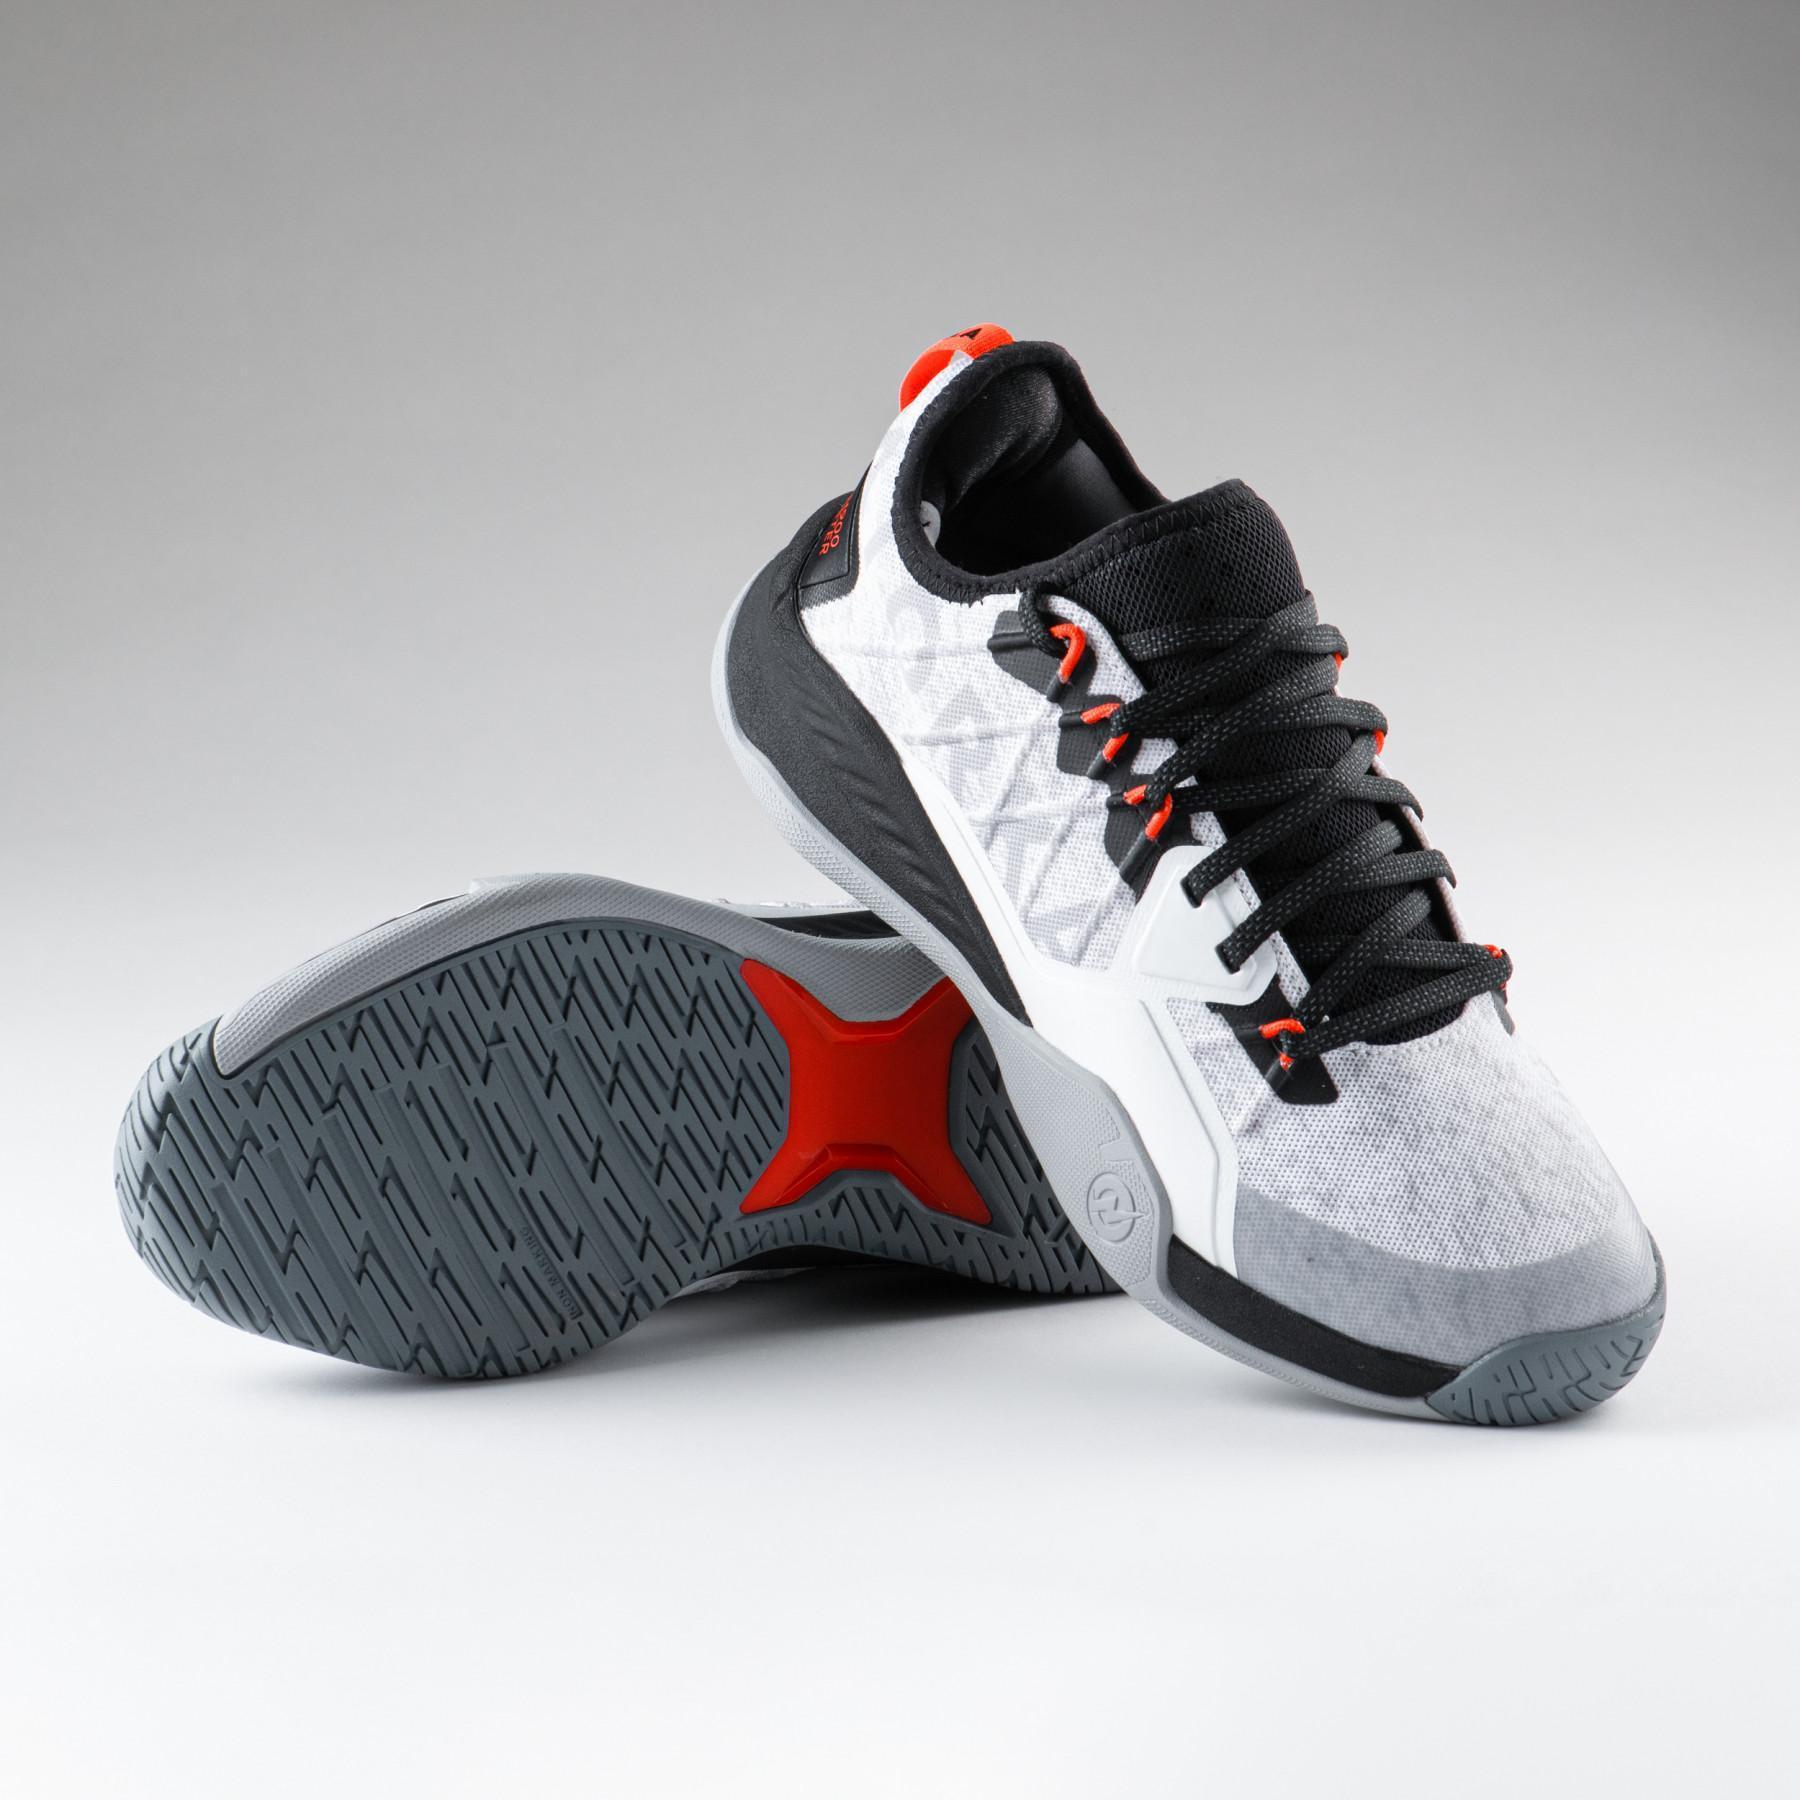 Women's shoes Atorka H900 Faster